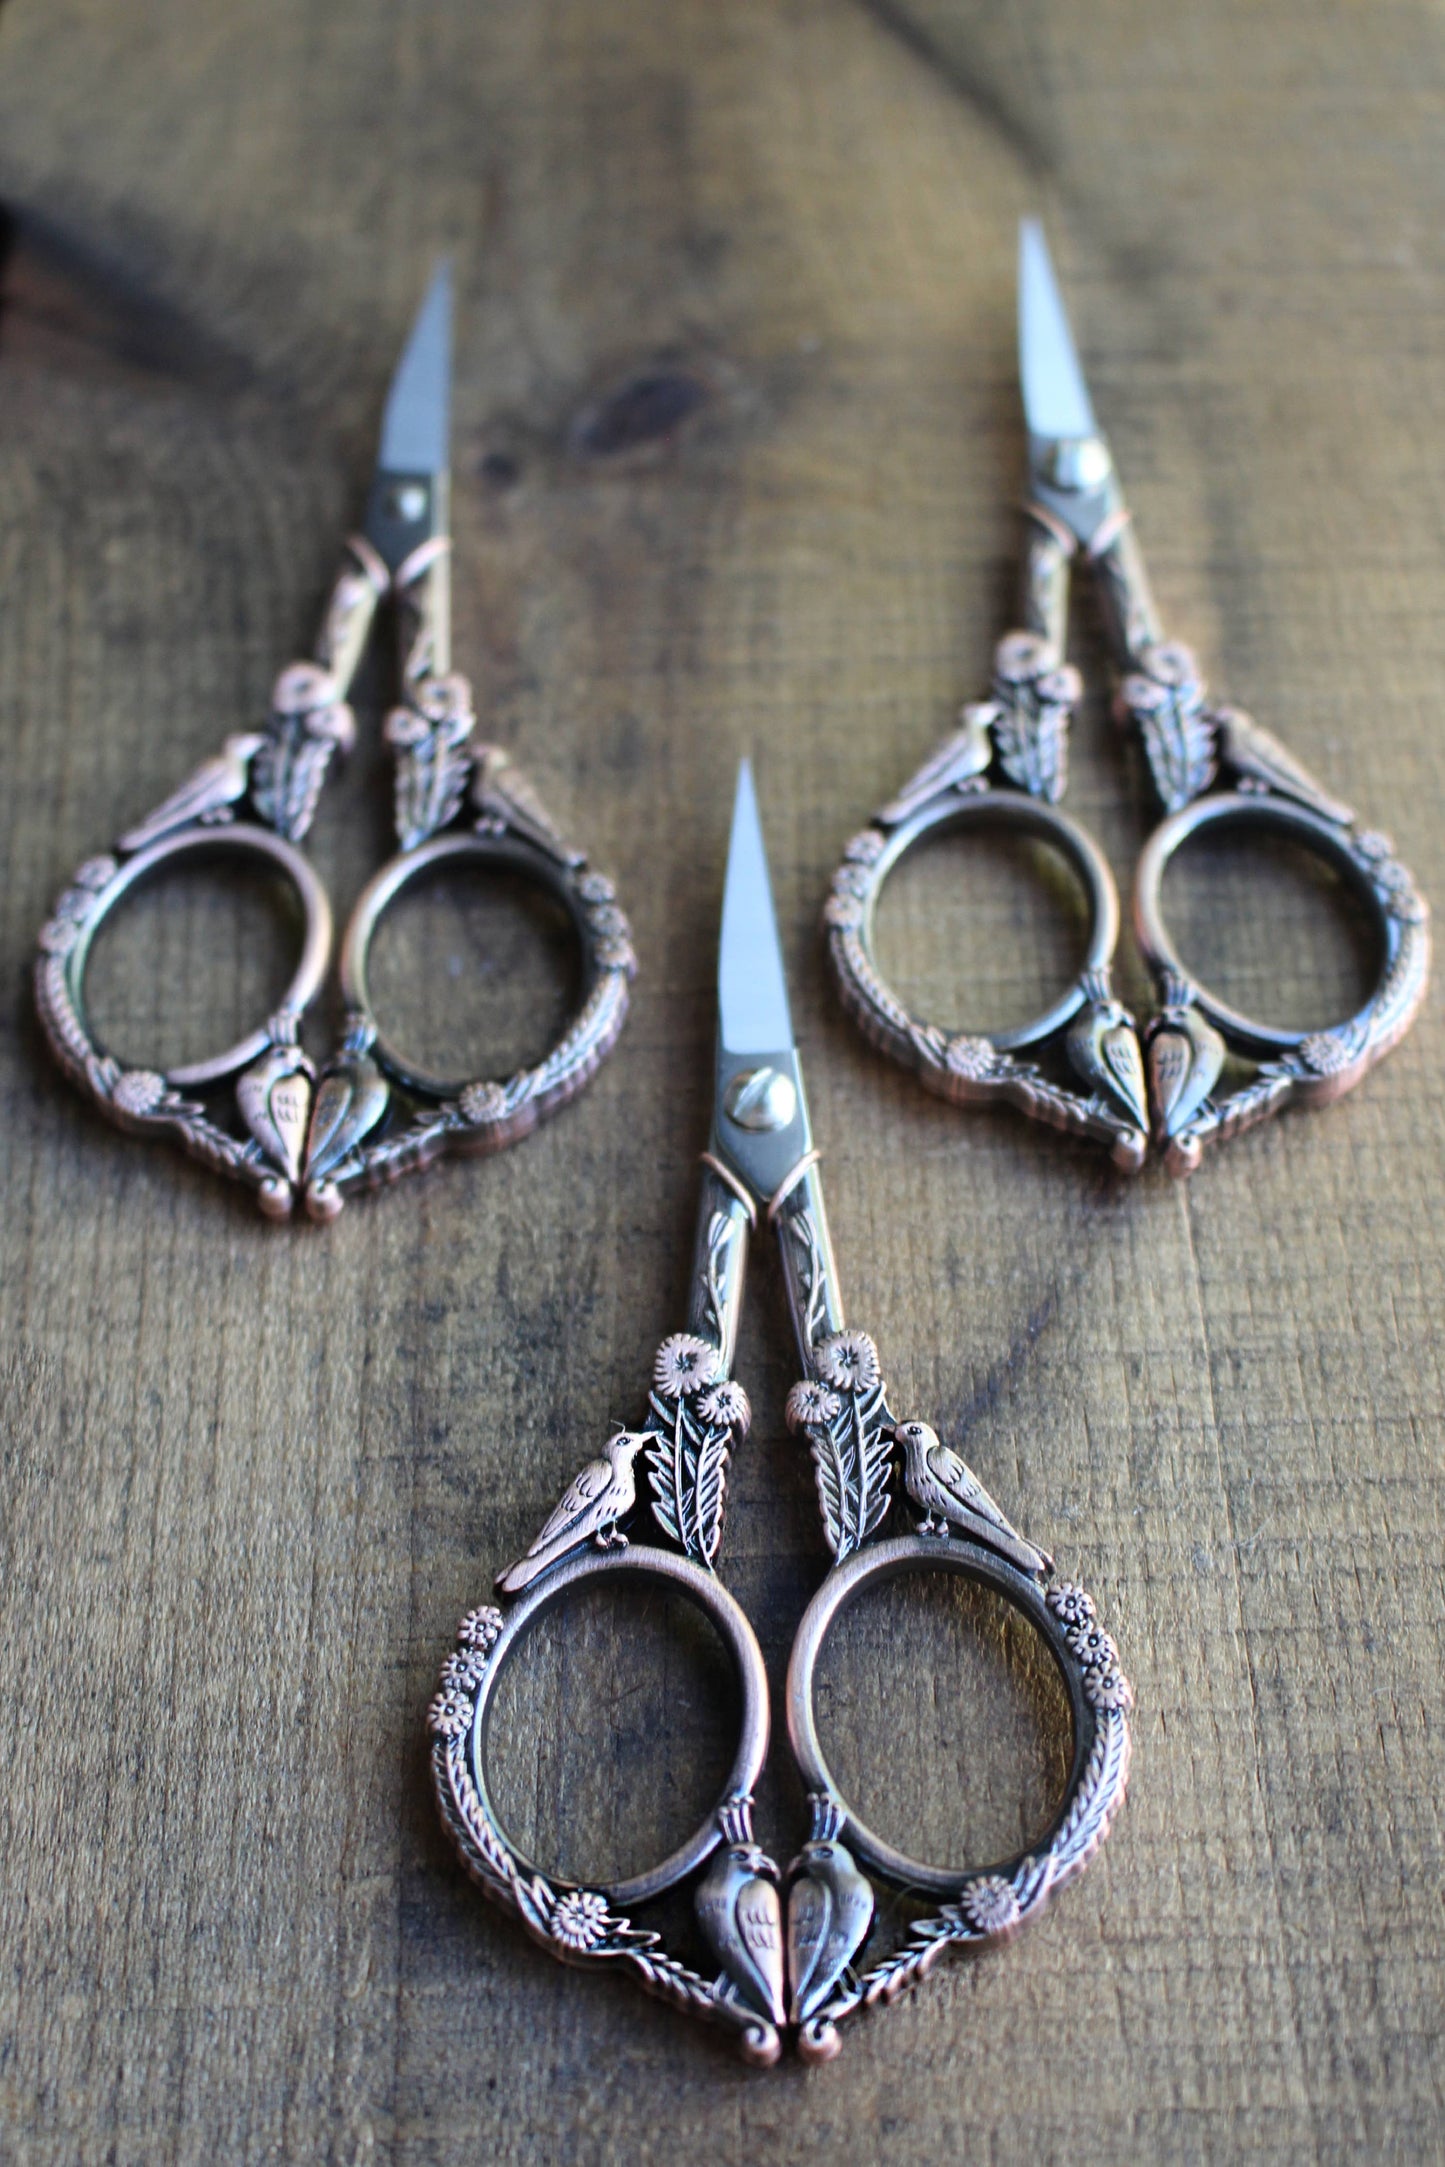 Feathered Friends Antique COPPER color Scissors - 4.5 inches